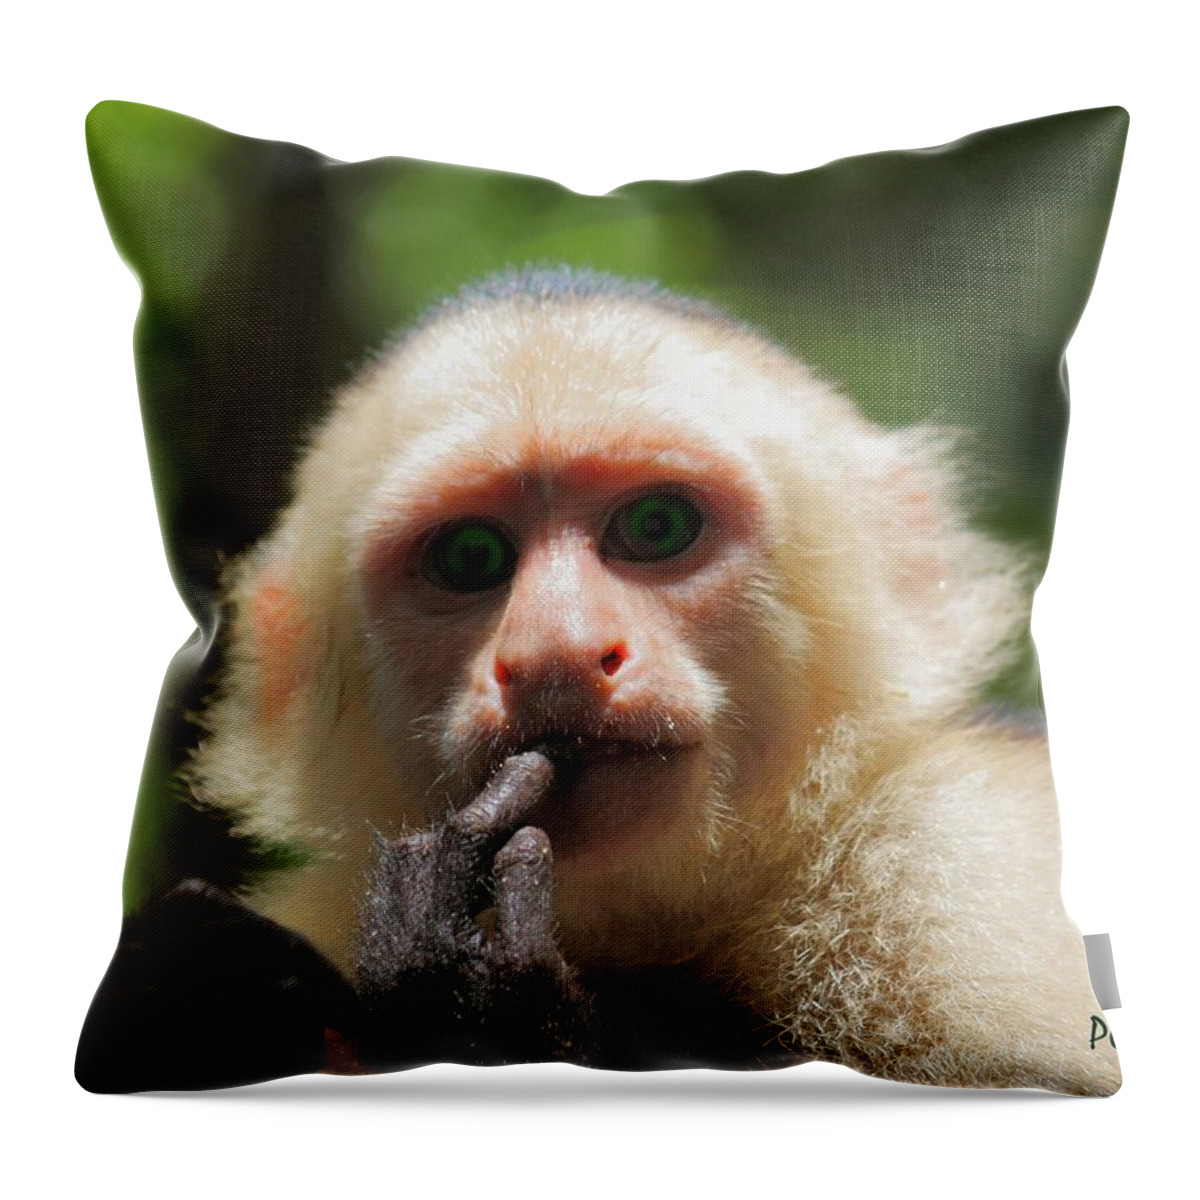 Contemplation Throw Pillow featuring the photograph Contemplation by Patrick Witz